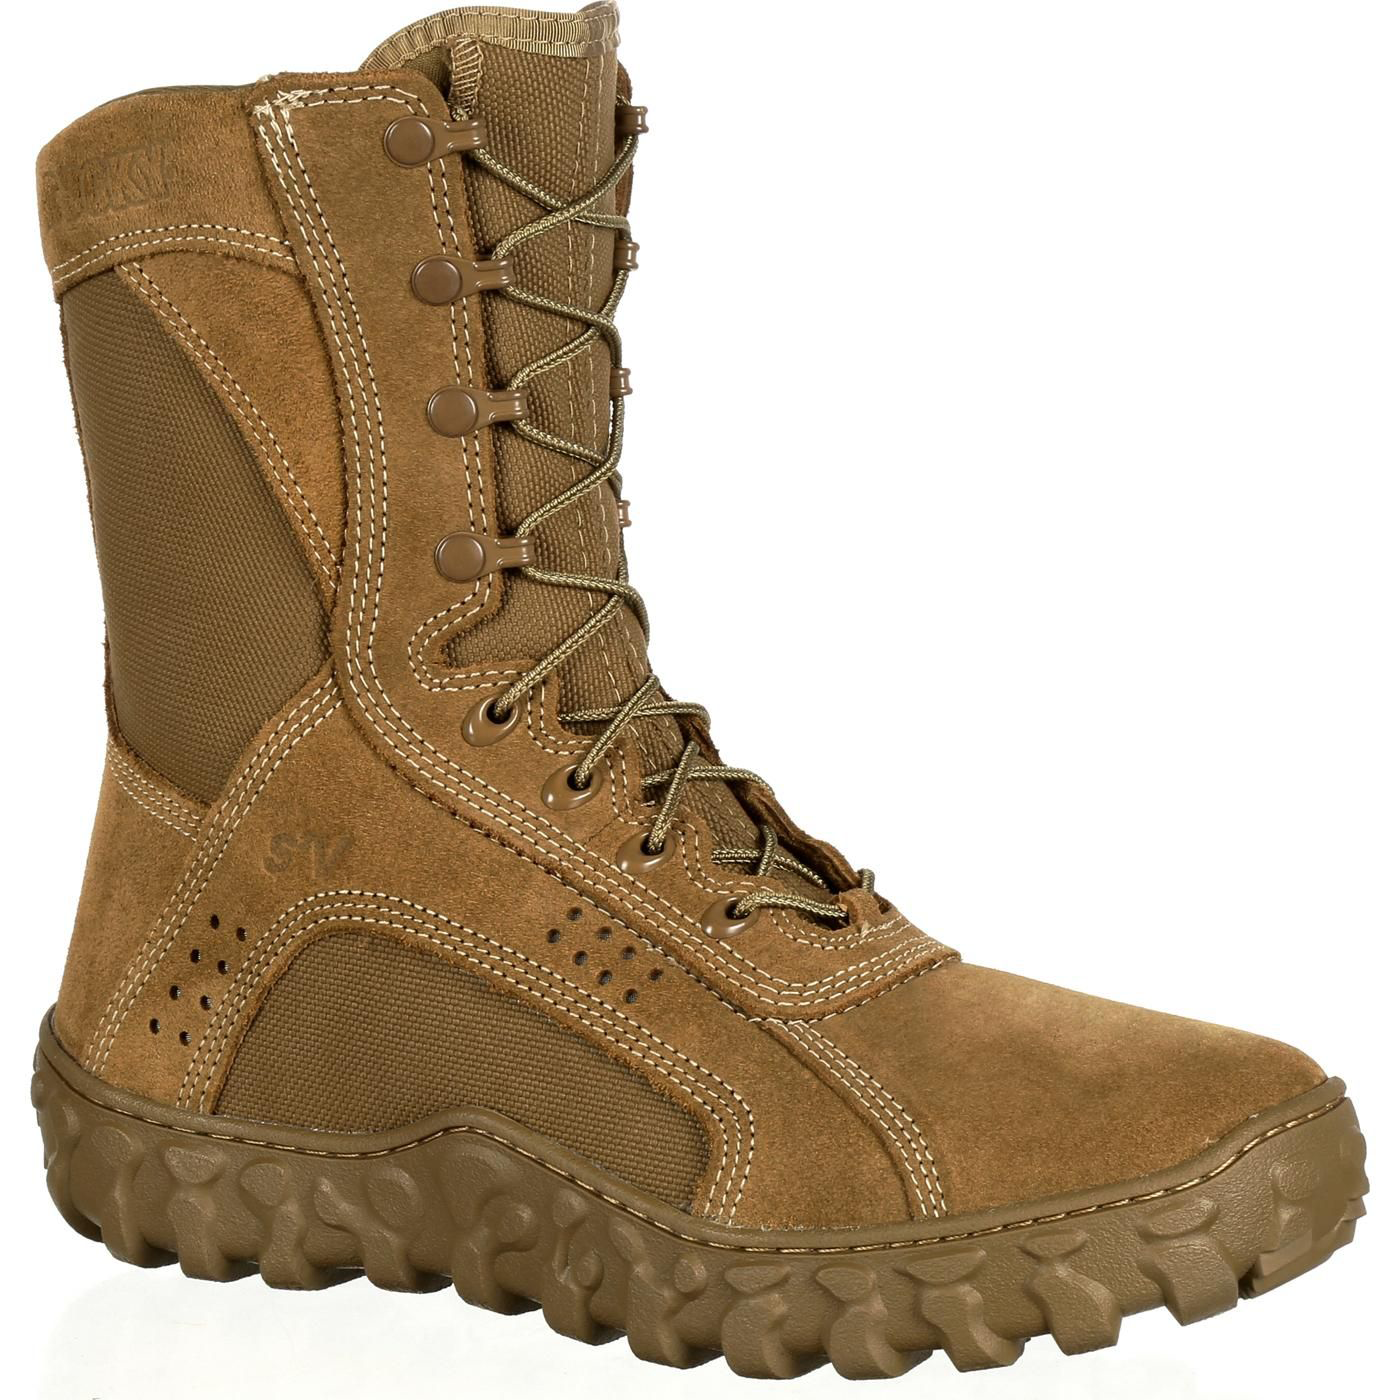 Rocky S2V Tactical Military Boots for Men - Coyote Brown - 5W